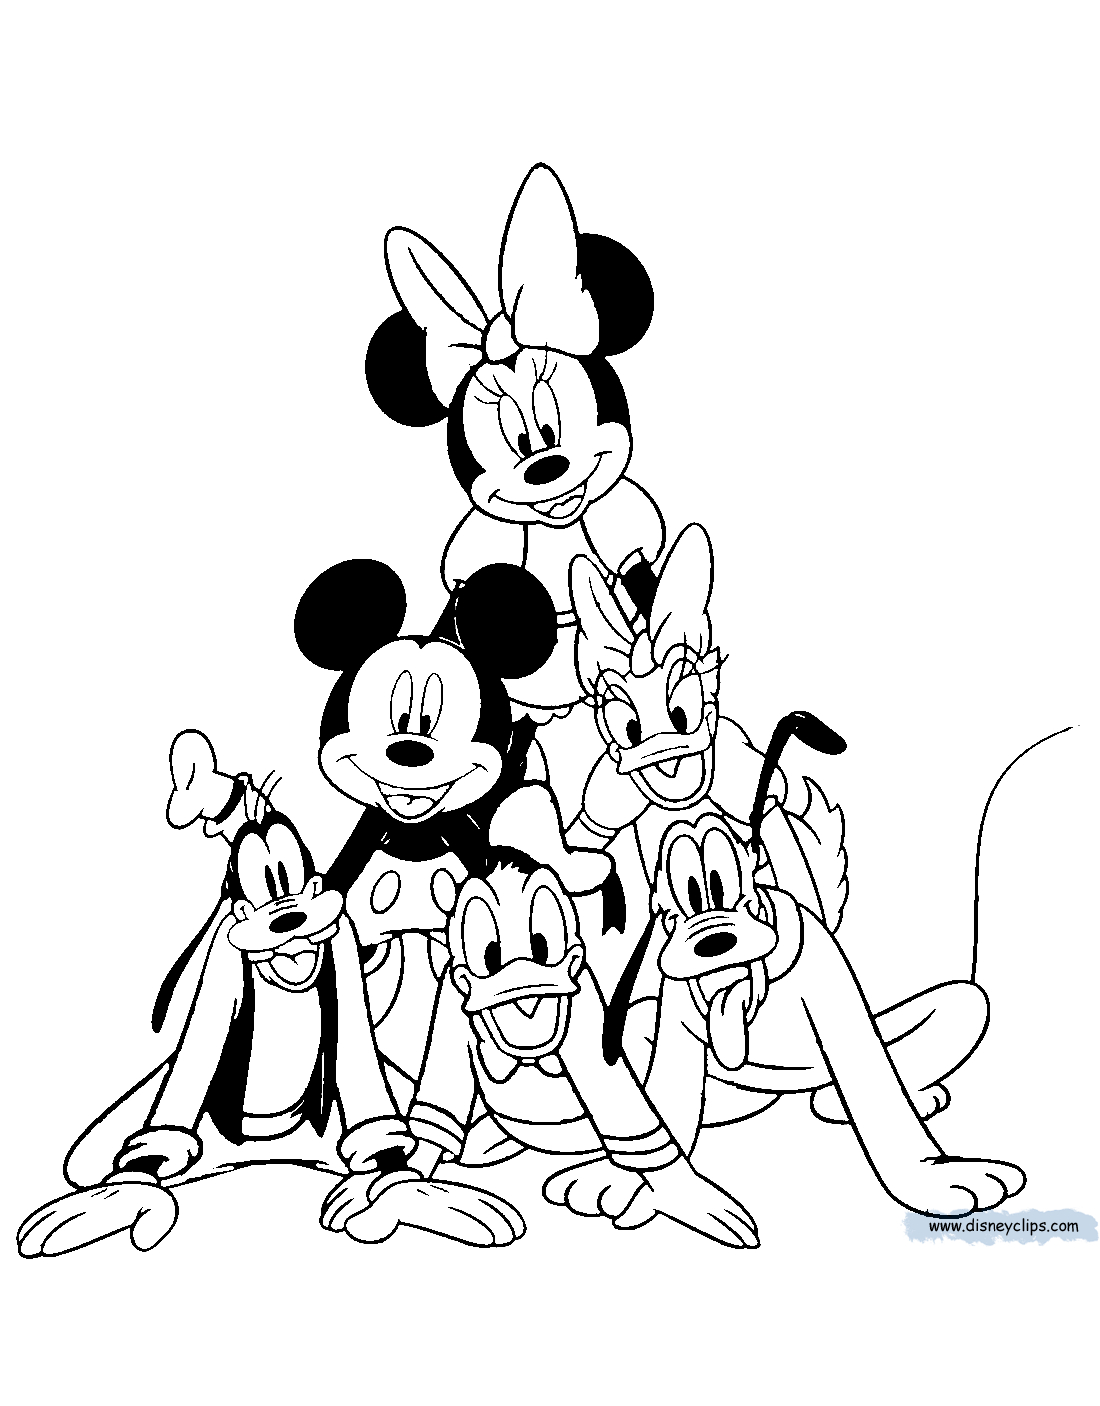 Mickey And Minnie Coloring Pages To Print Mickey Mouse Friends Coloring Pages 5 Disneyclips